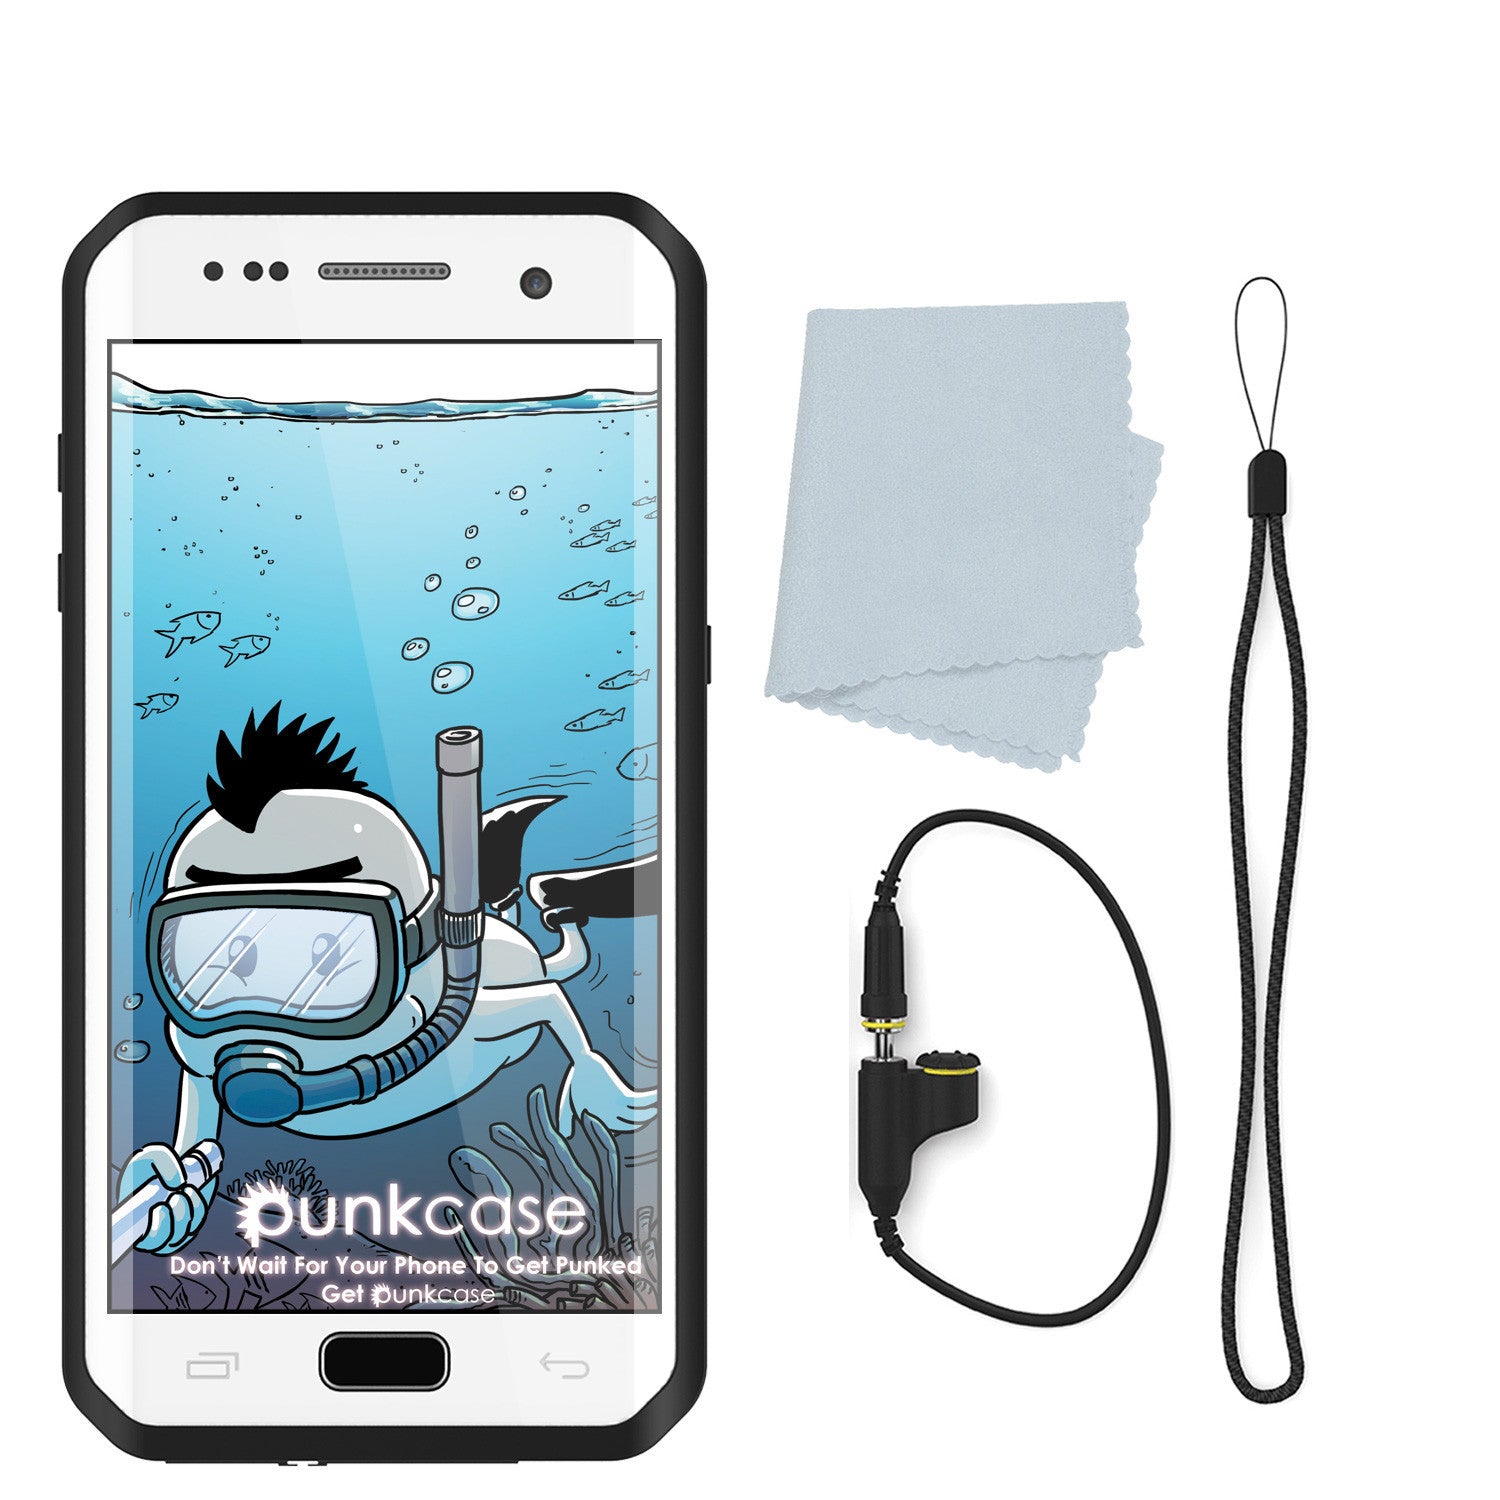 PUNKCASE - Studstar Series Snowproof Case for Galaxy S7 Edge | White